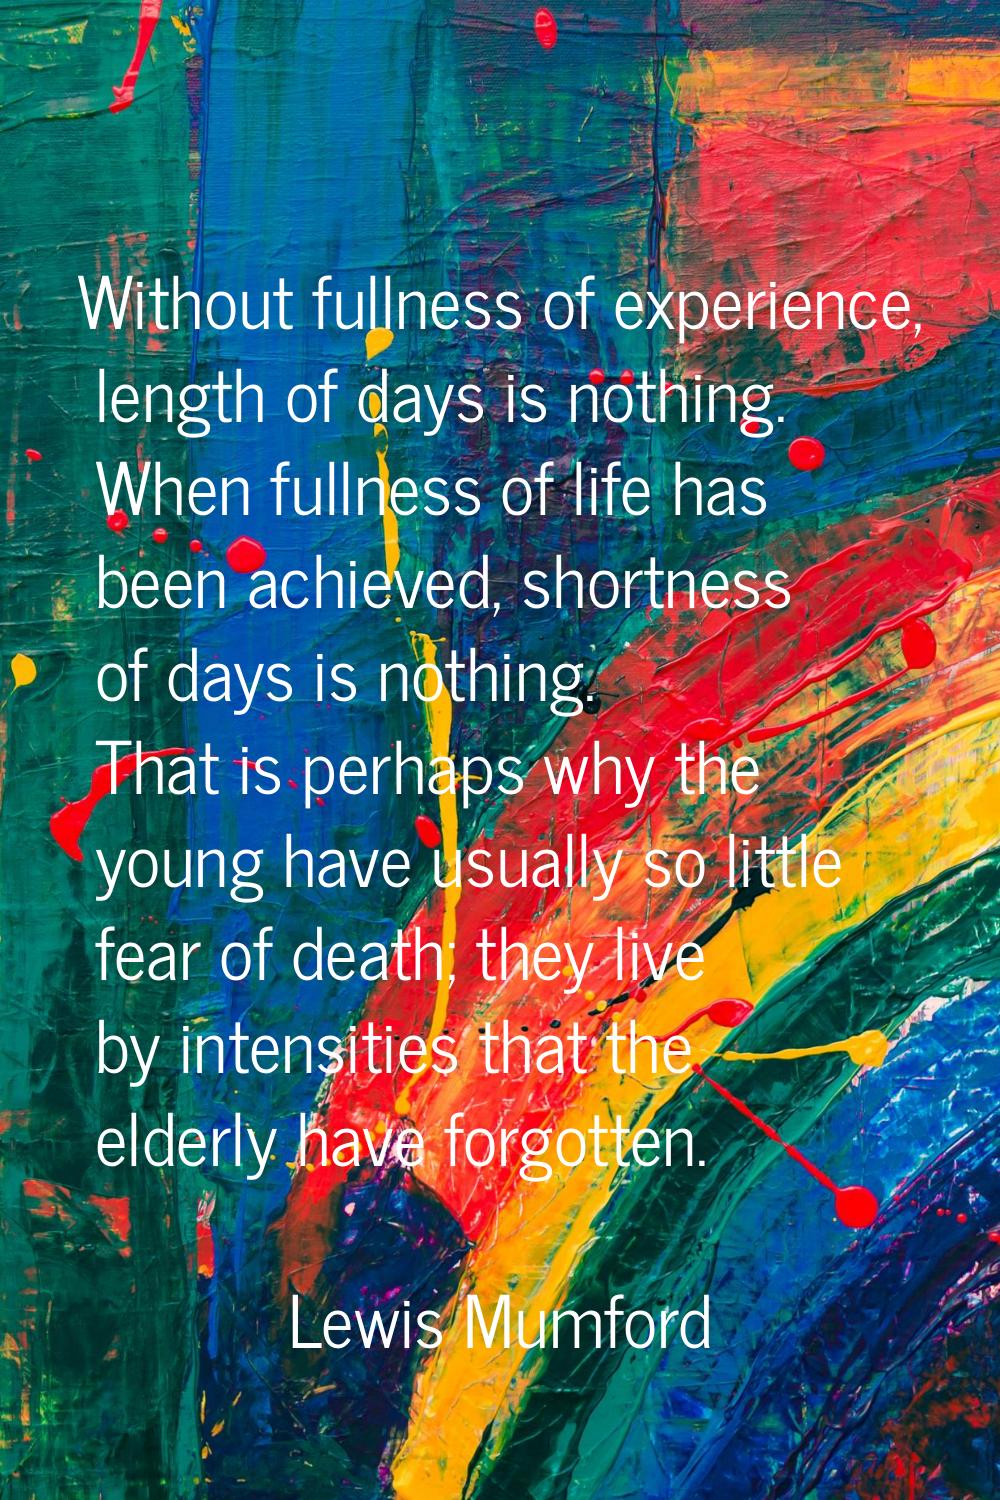 Without fullness of experience, length of days is nothing. When fullness of life has been achieved,